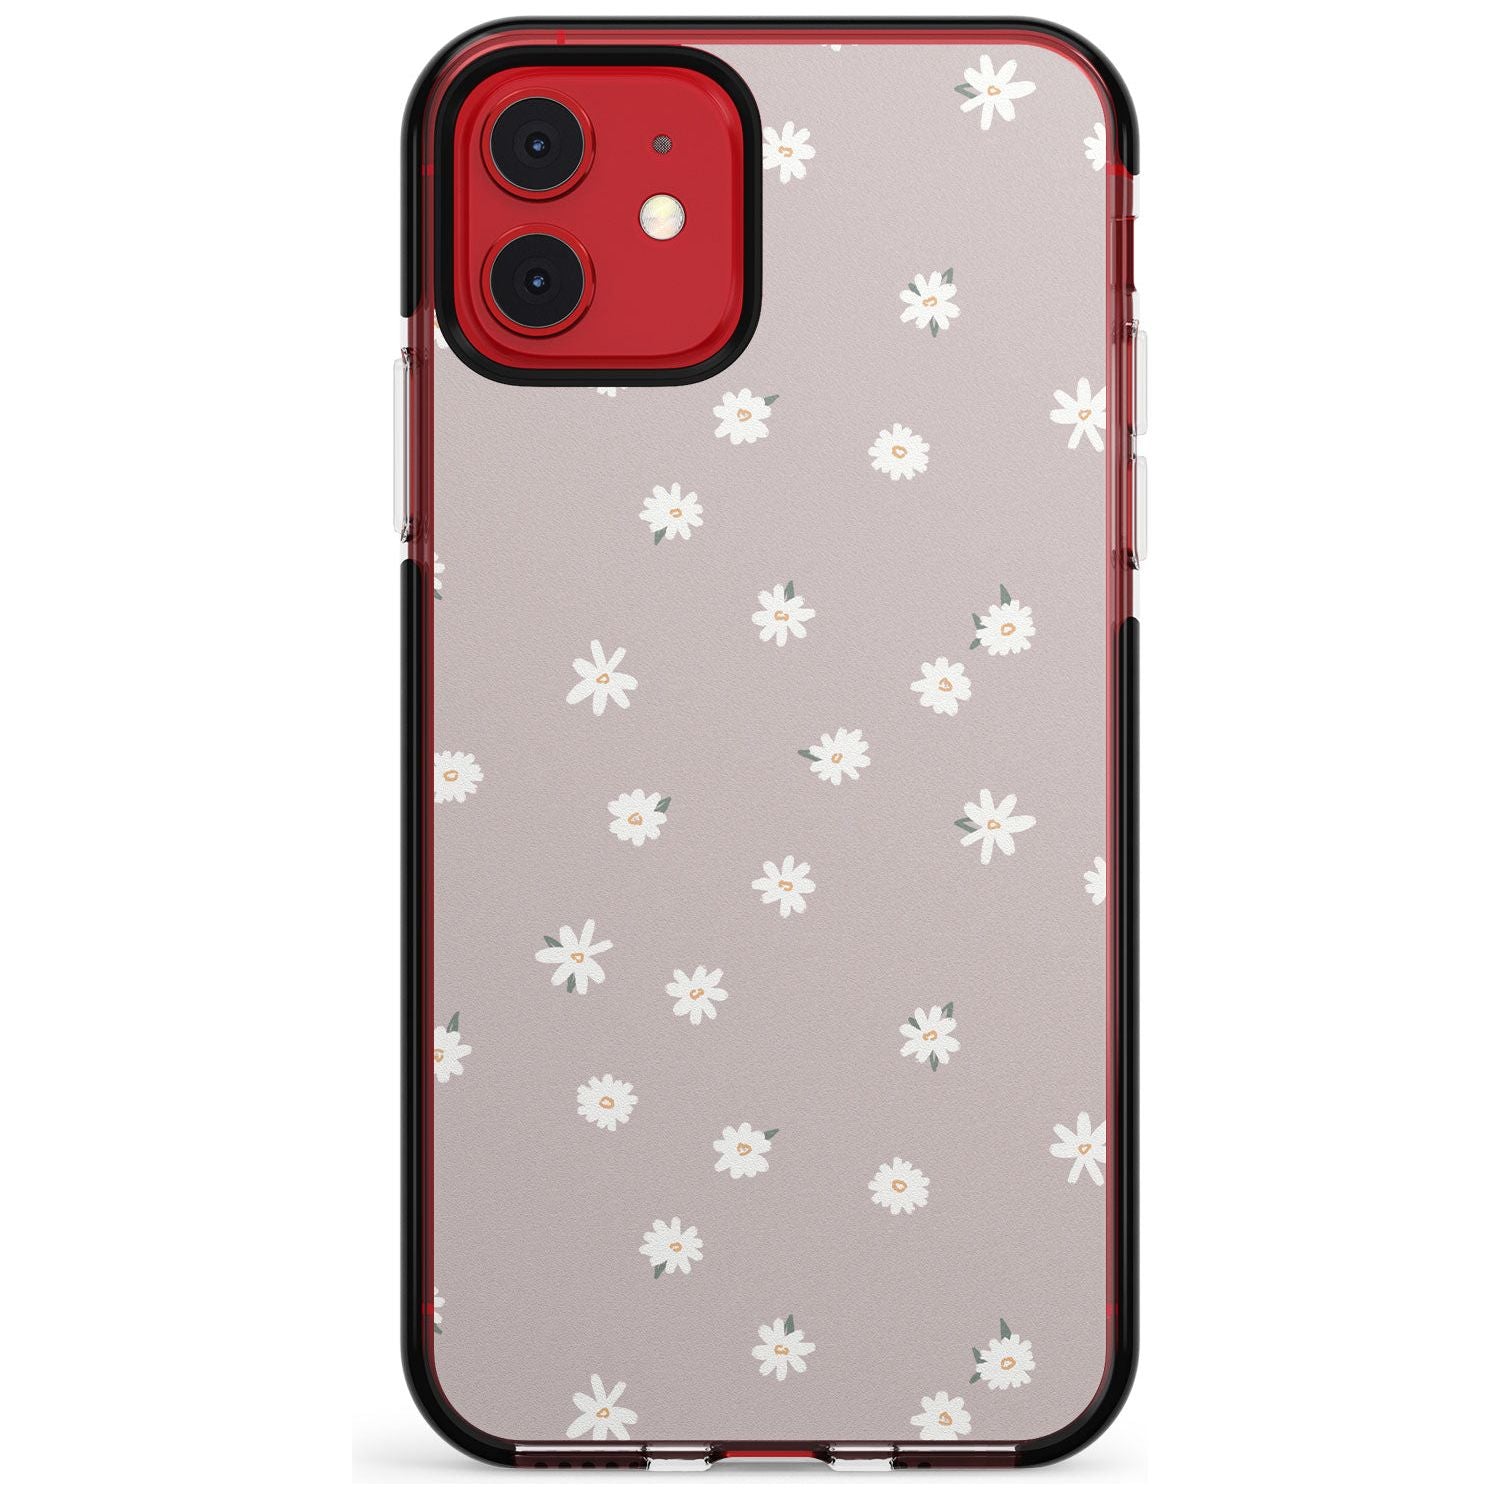 Painted Daises - Dark Pink Cute Floral Design Pink Fade Impact Phone Case for iPhone 11 Pro Max